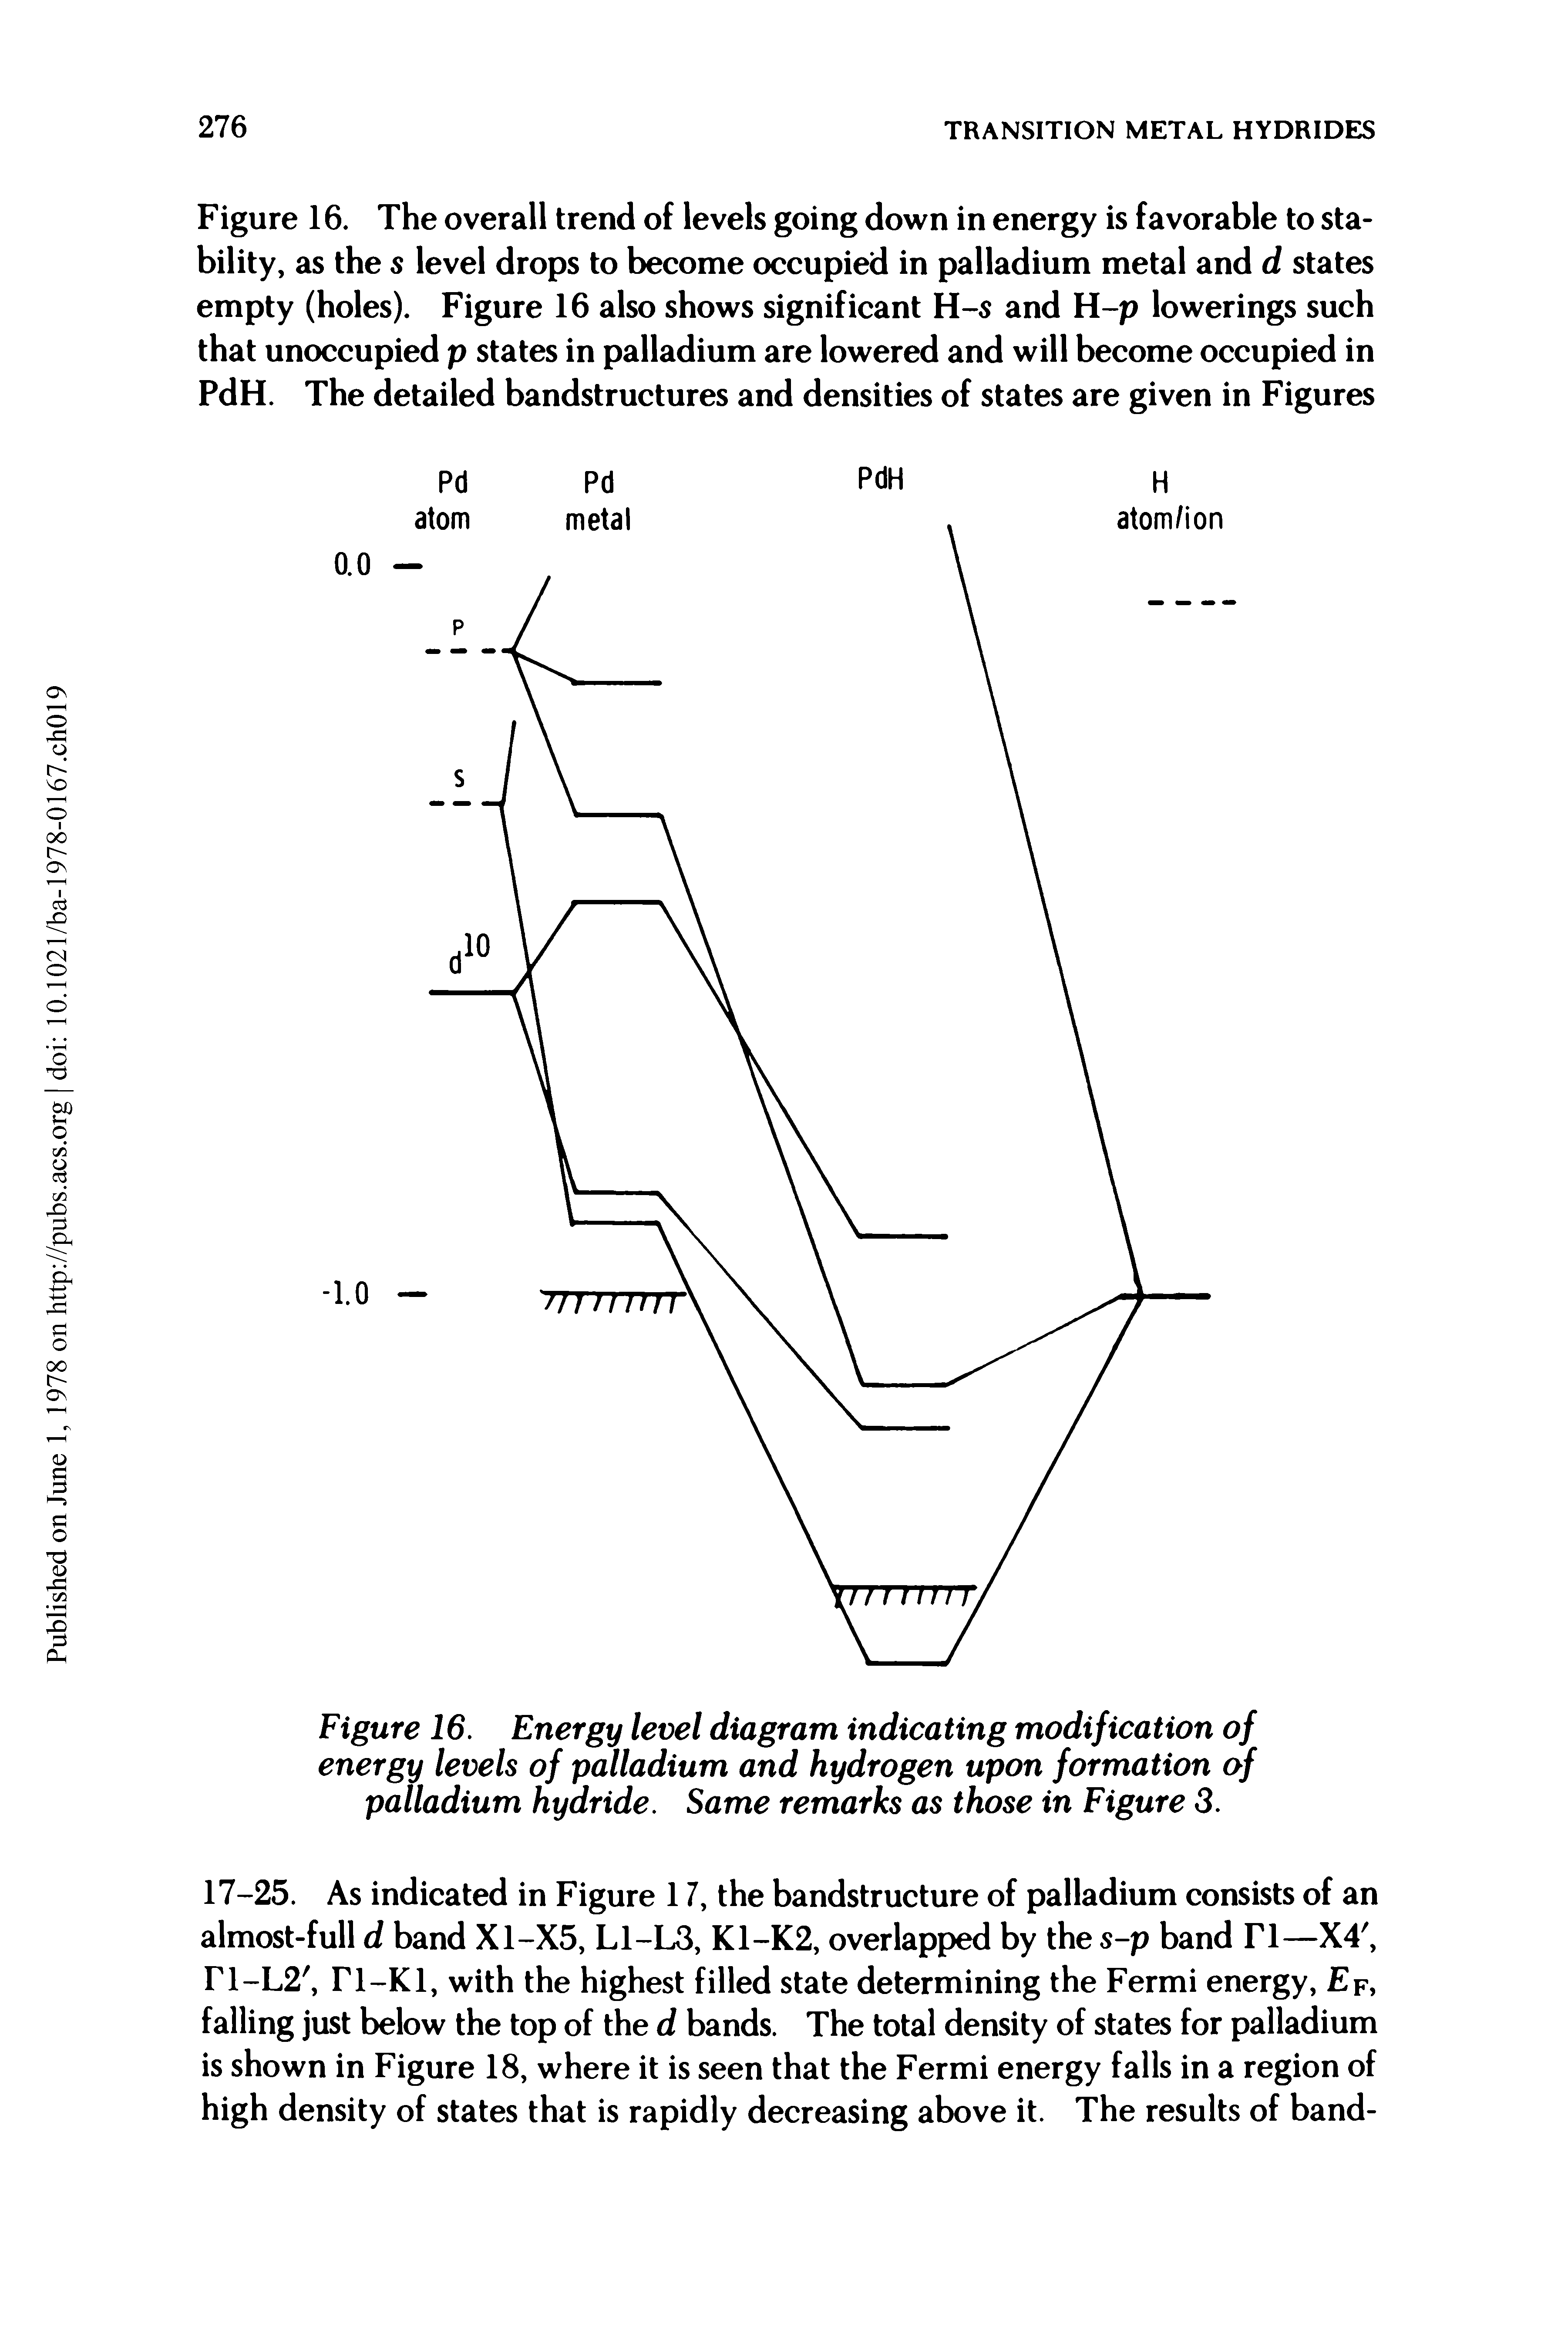 Figure 16. The overall trend of levels going down in energy is favorable to stability, as the s level drops to become occupied in palladium metal and d states empty (holes). Figure 16 also shows significant H-s and H-p lowerings such that unoccupied p states in palladium are lowered and will become occupied in PdH. The detailed bandstructures and densities of states are given in Figures...